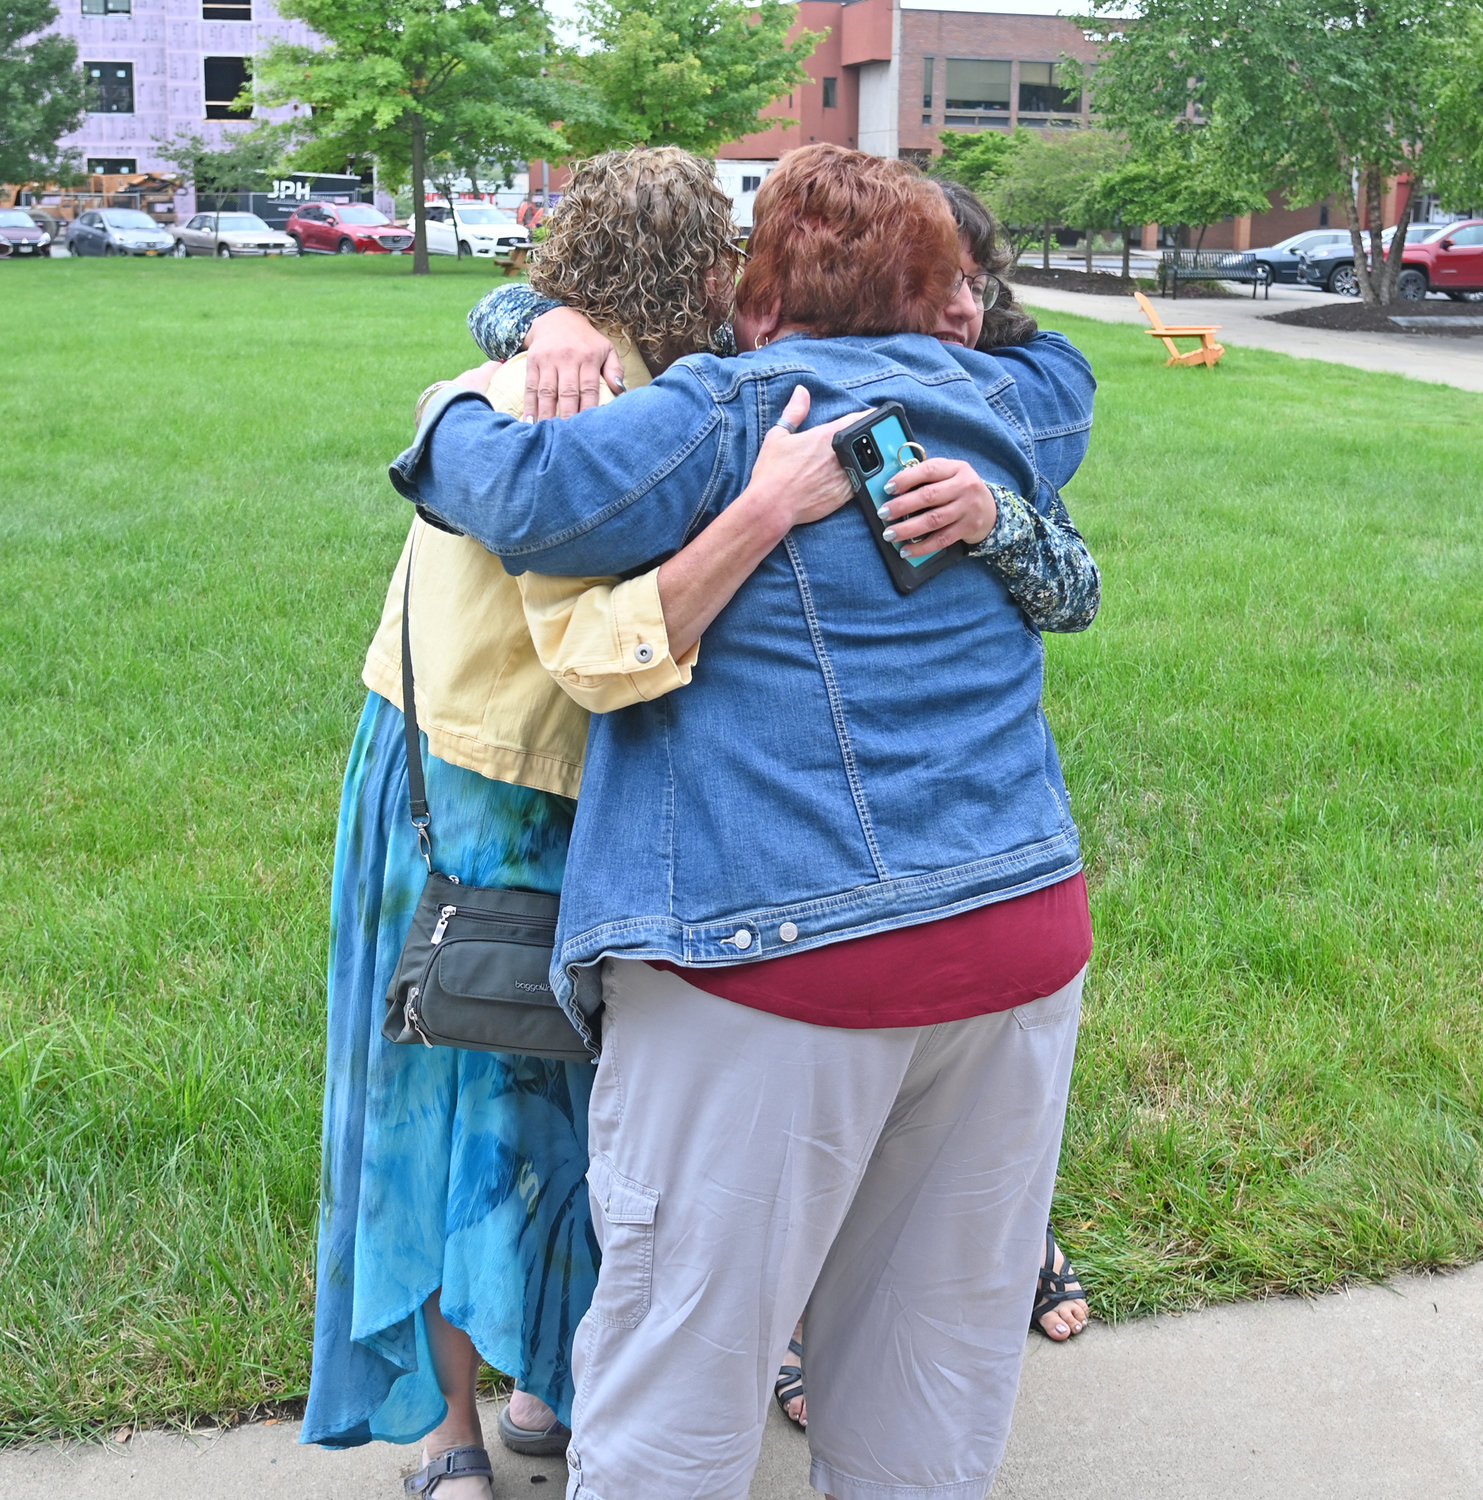 Lisa Davis, Judy Riker, and Shari Bujold share a hug after raising the brain aneurysm awareness flag at Rome City Hall on Friday. All three women had a loved one pass away because of an aneurysm.